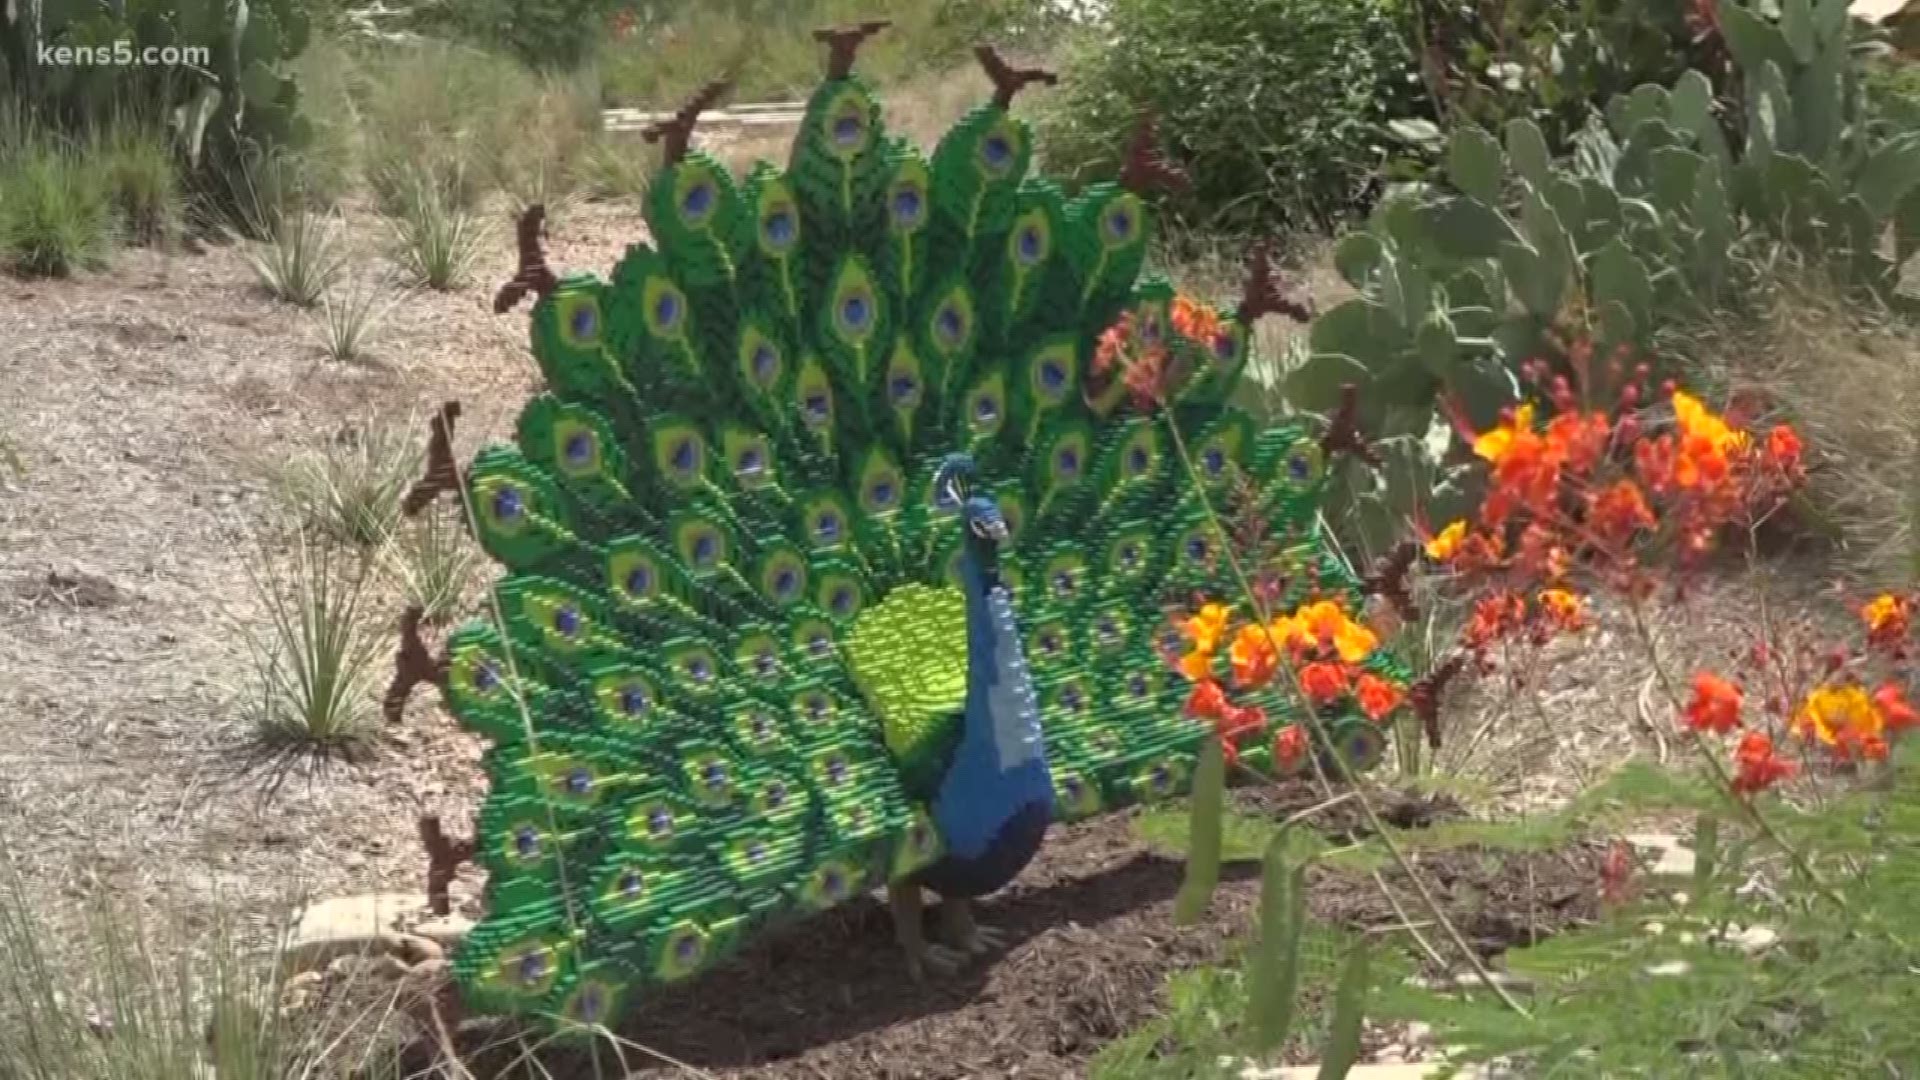 The San Antonio Botanical Gardens are using Legos this weekend to connect people with nature.